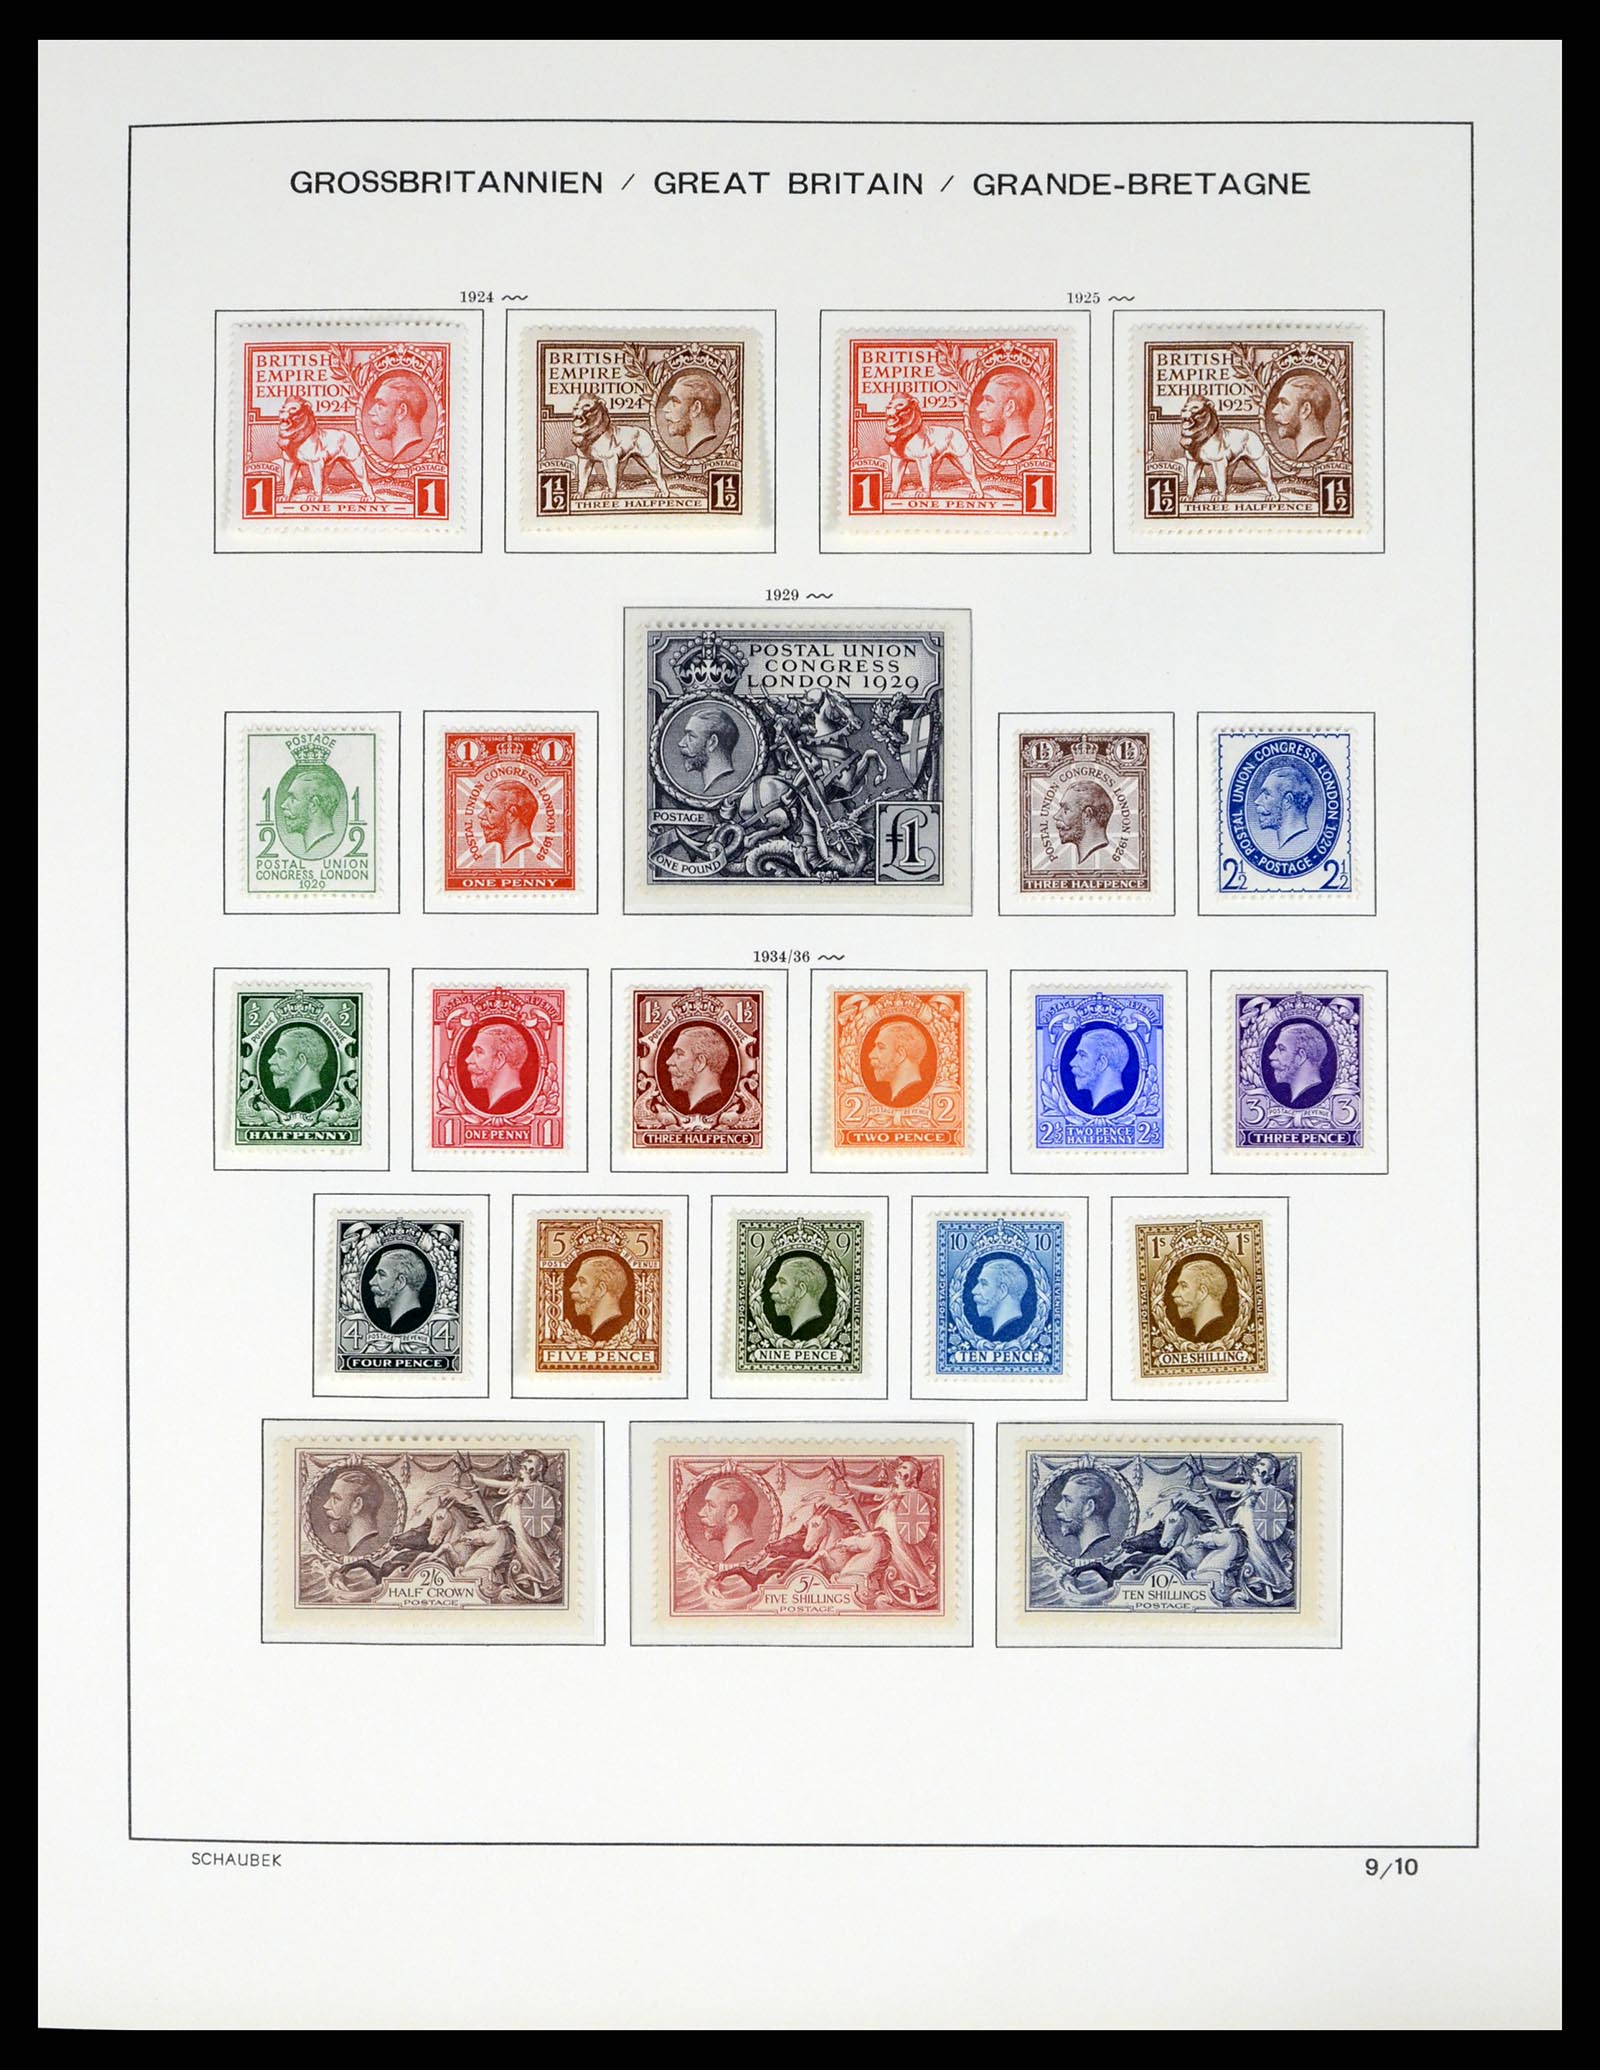 37585 010 - Stamp collection 37585 Great Britain supercollection 1840-2015.